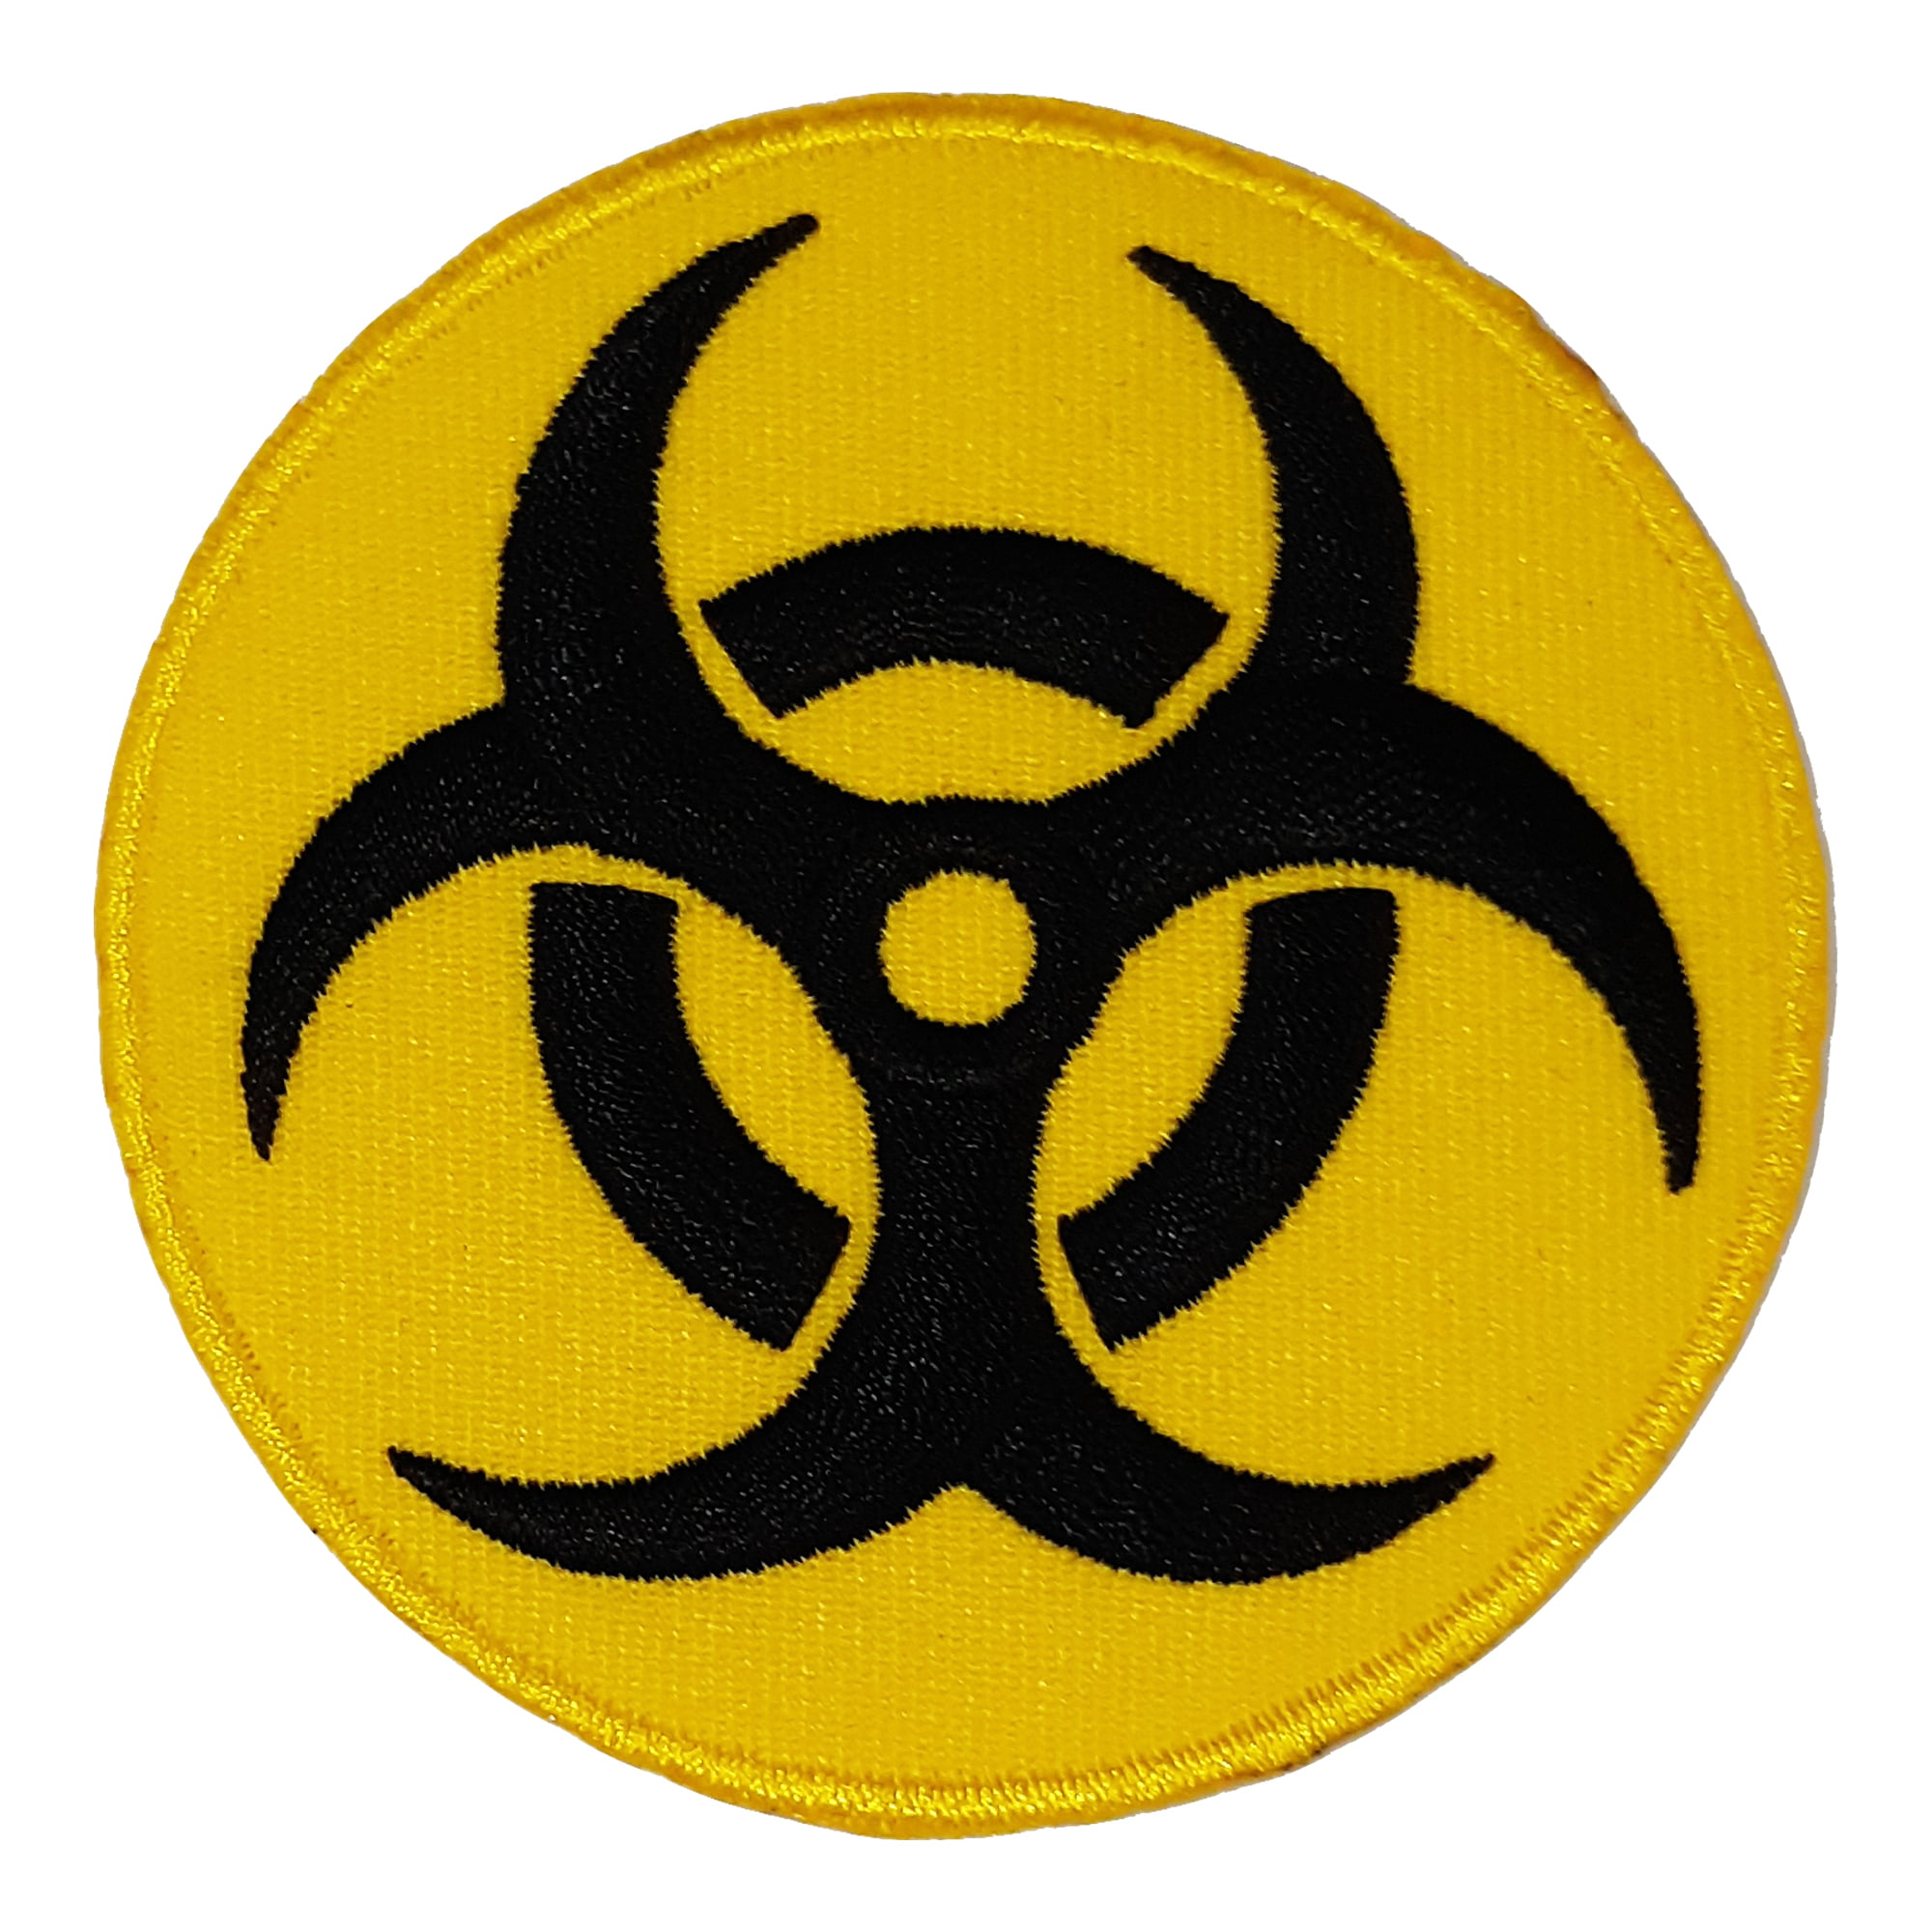 I SURVIVED 2020 BIOHAZARD Response Team Embroidered Patch Iron Sew-On Applique 